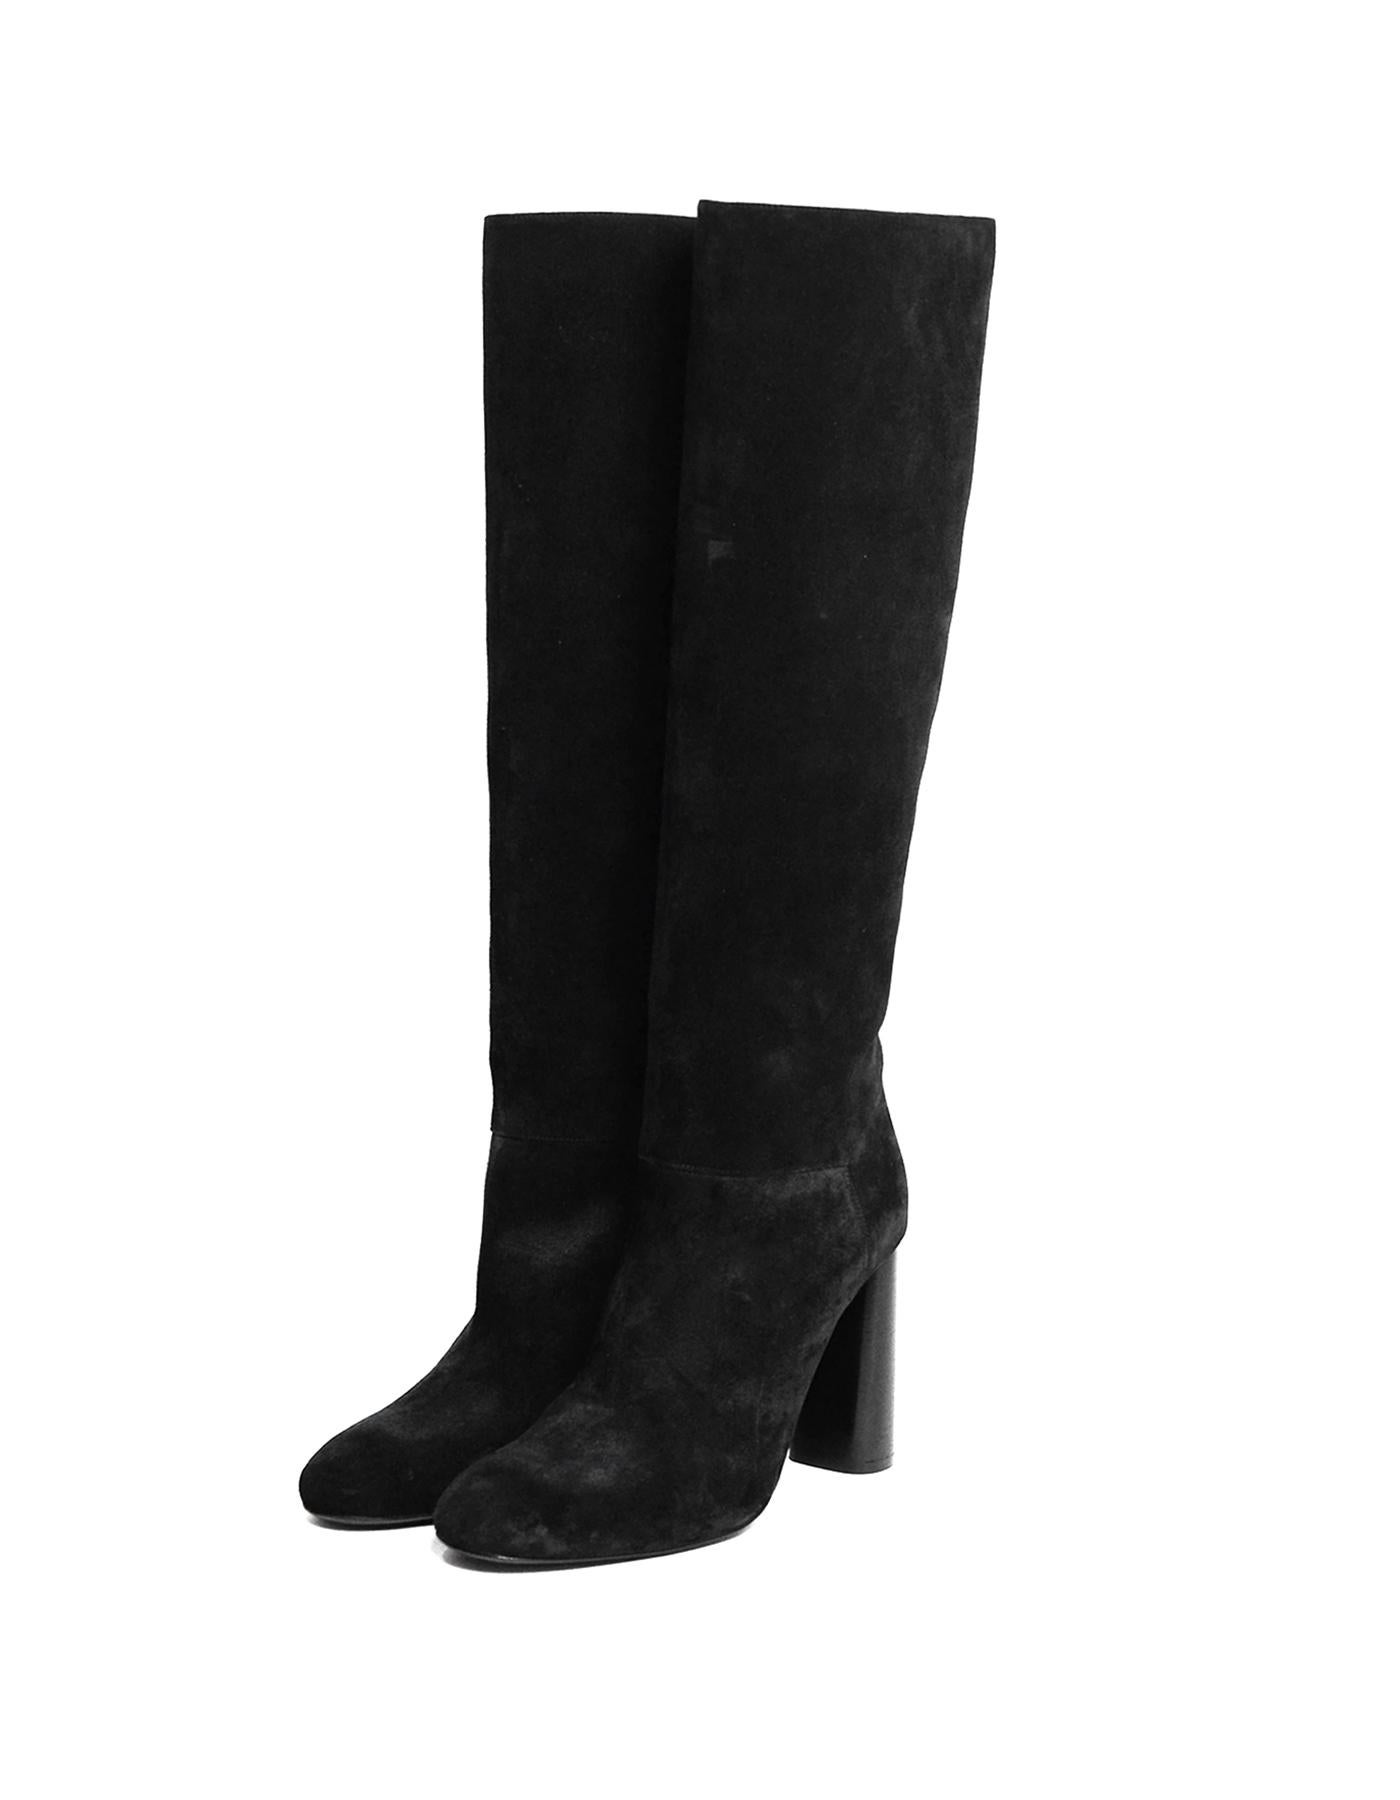 Lanvin Black Suede Knee-High Boots sz 39.5 rt $592

Made In: Italy
Color: Black
Materials: Suede
Closure/Opening: Slide on
Overall Condition: Never worn, with small seam splitting to back and light marks to sides due to storage
Estimated Retail: